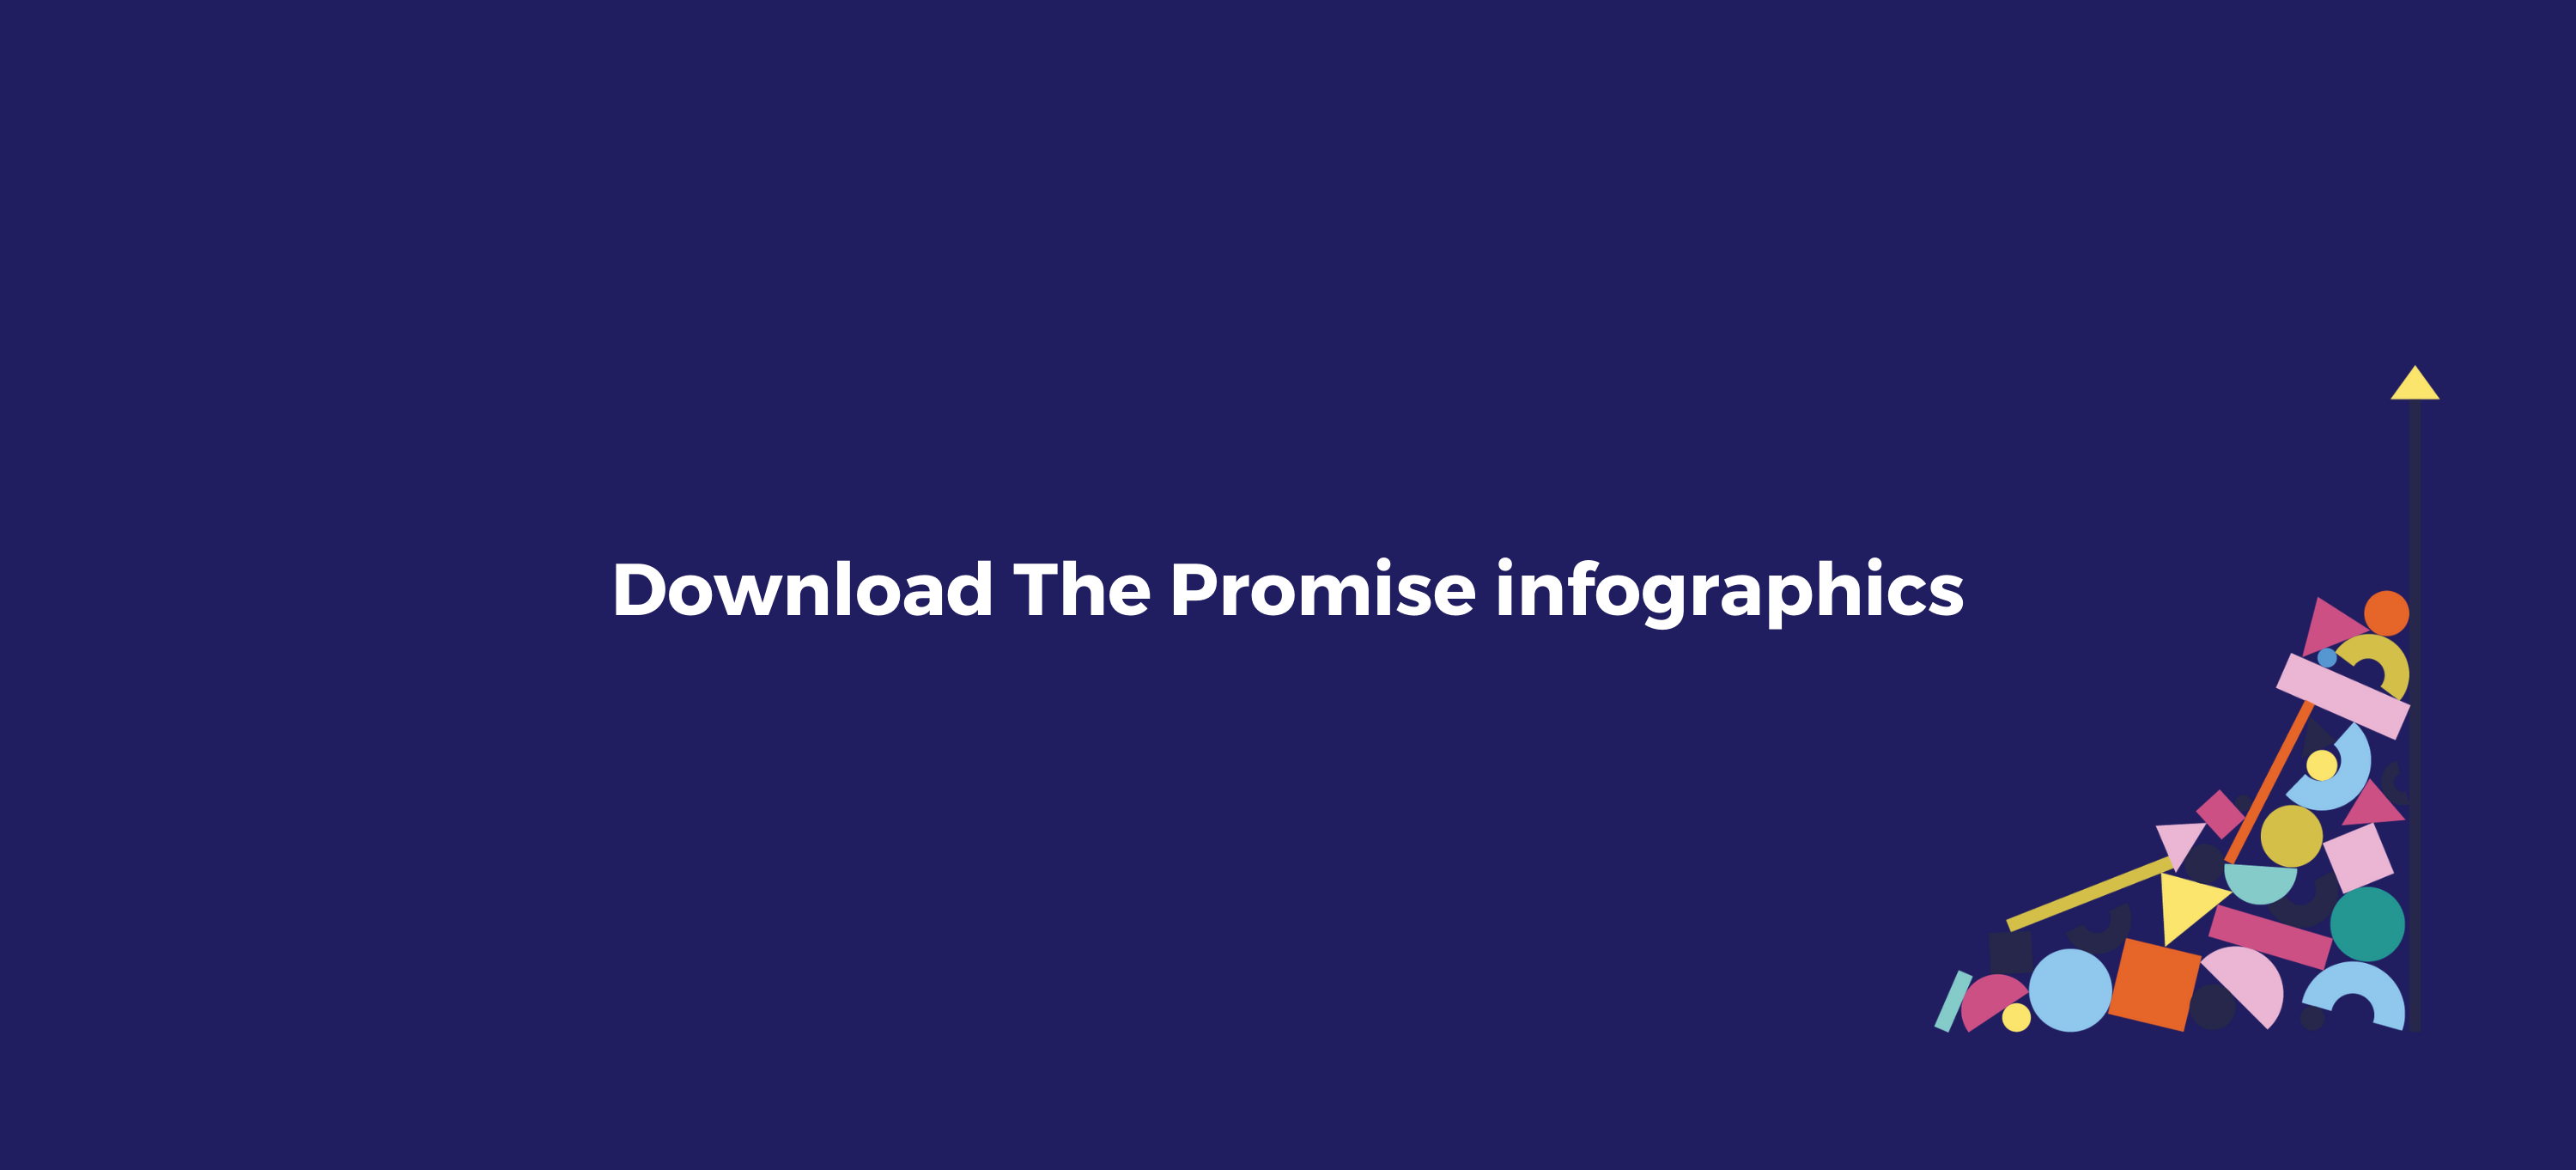 Download The Promise infographics